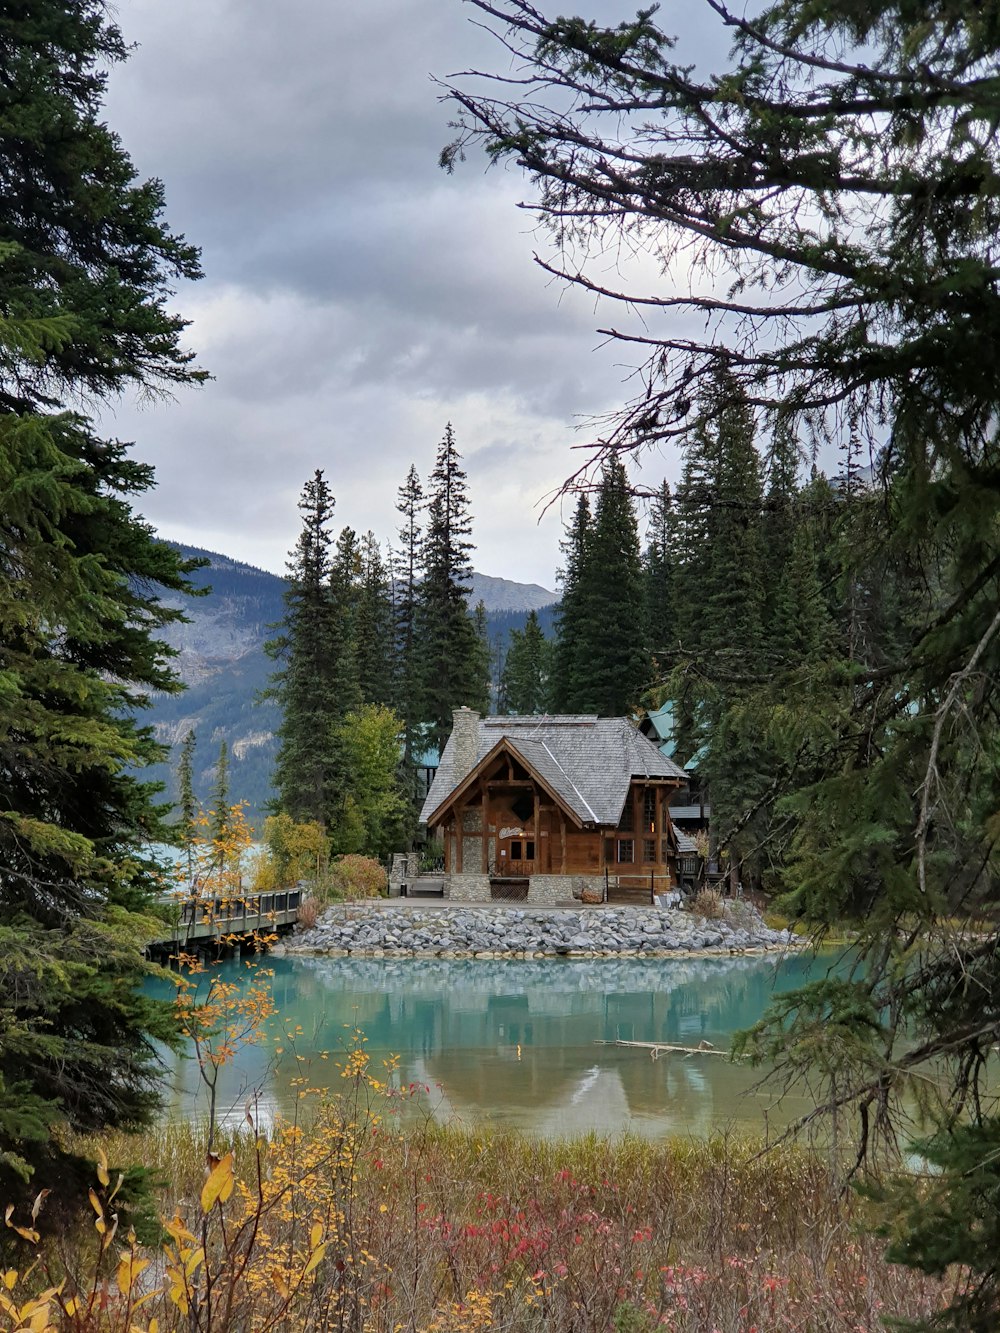 a cabin in the middle of a lake surrounded by trees